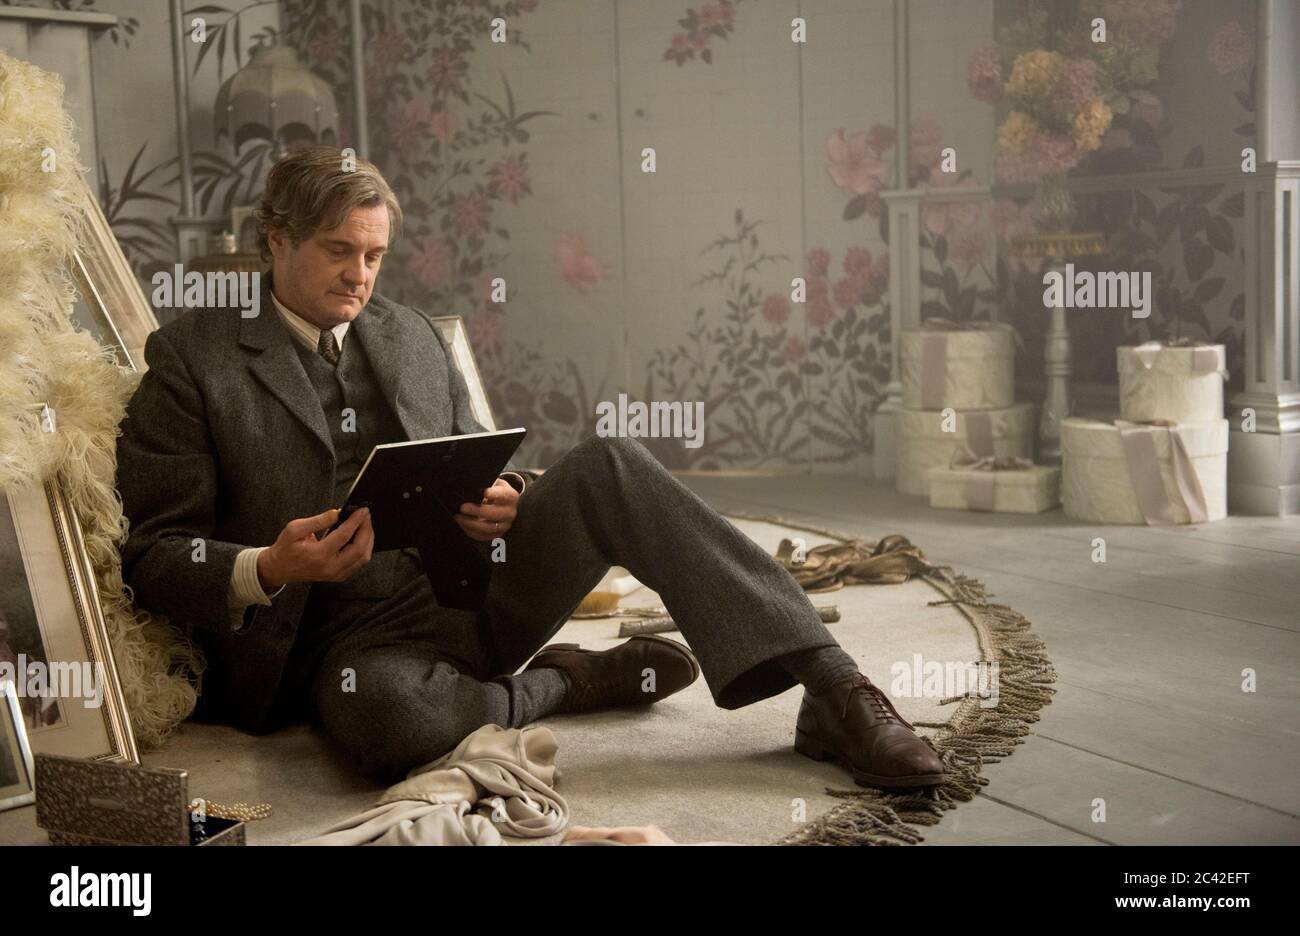 RELEASE DATE: August 14, 2020 TITLE: The Secret Garden STUDIO: STX Films DIRECTOR: Marc Munden PLOT: An orphaned girl discovers a magical garden hidden at her strict uncle's estate. STARRING: COLIN FIRTH as Lord Archibald Craven. (Credit Image: © STX Films/Entertainment Pictures) Stock Photo